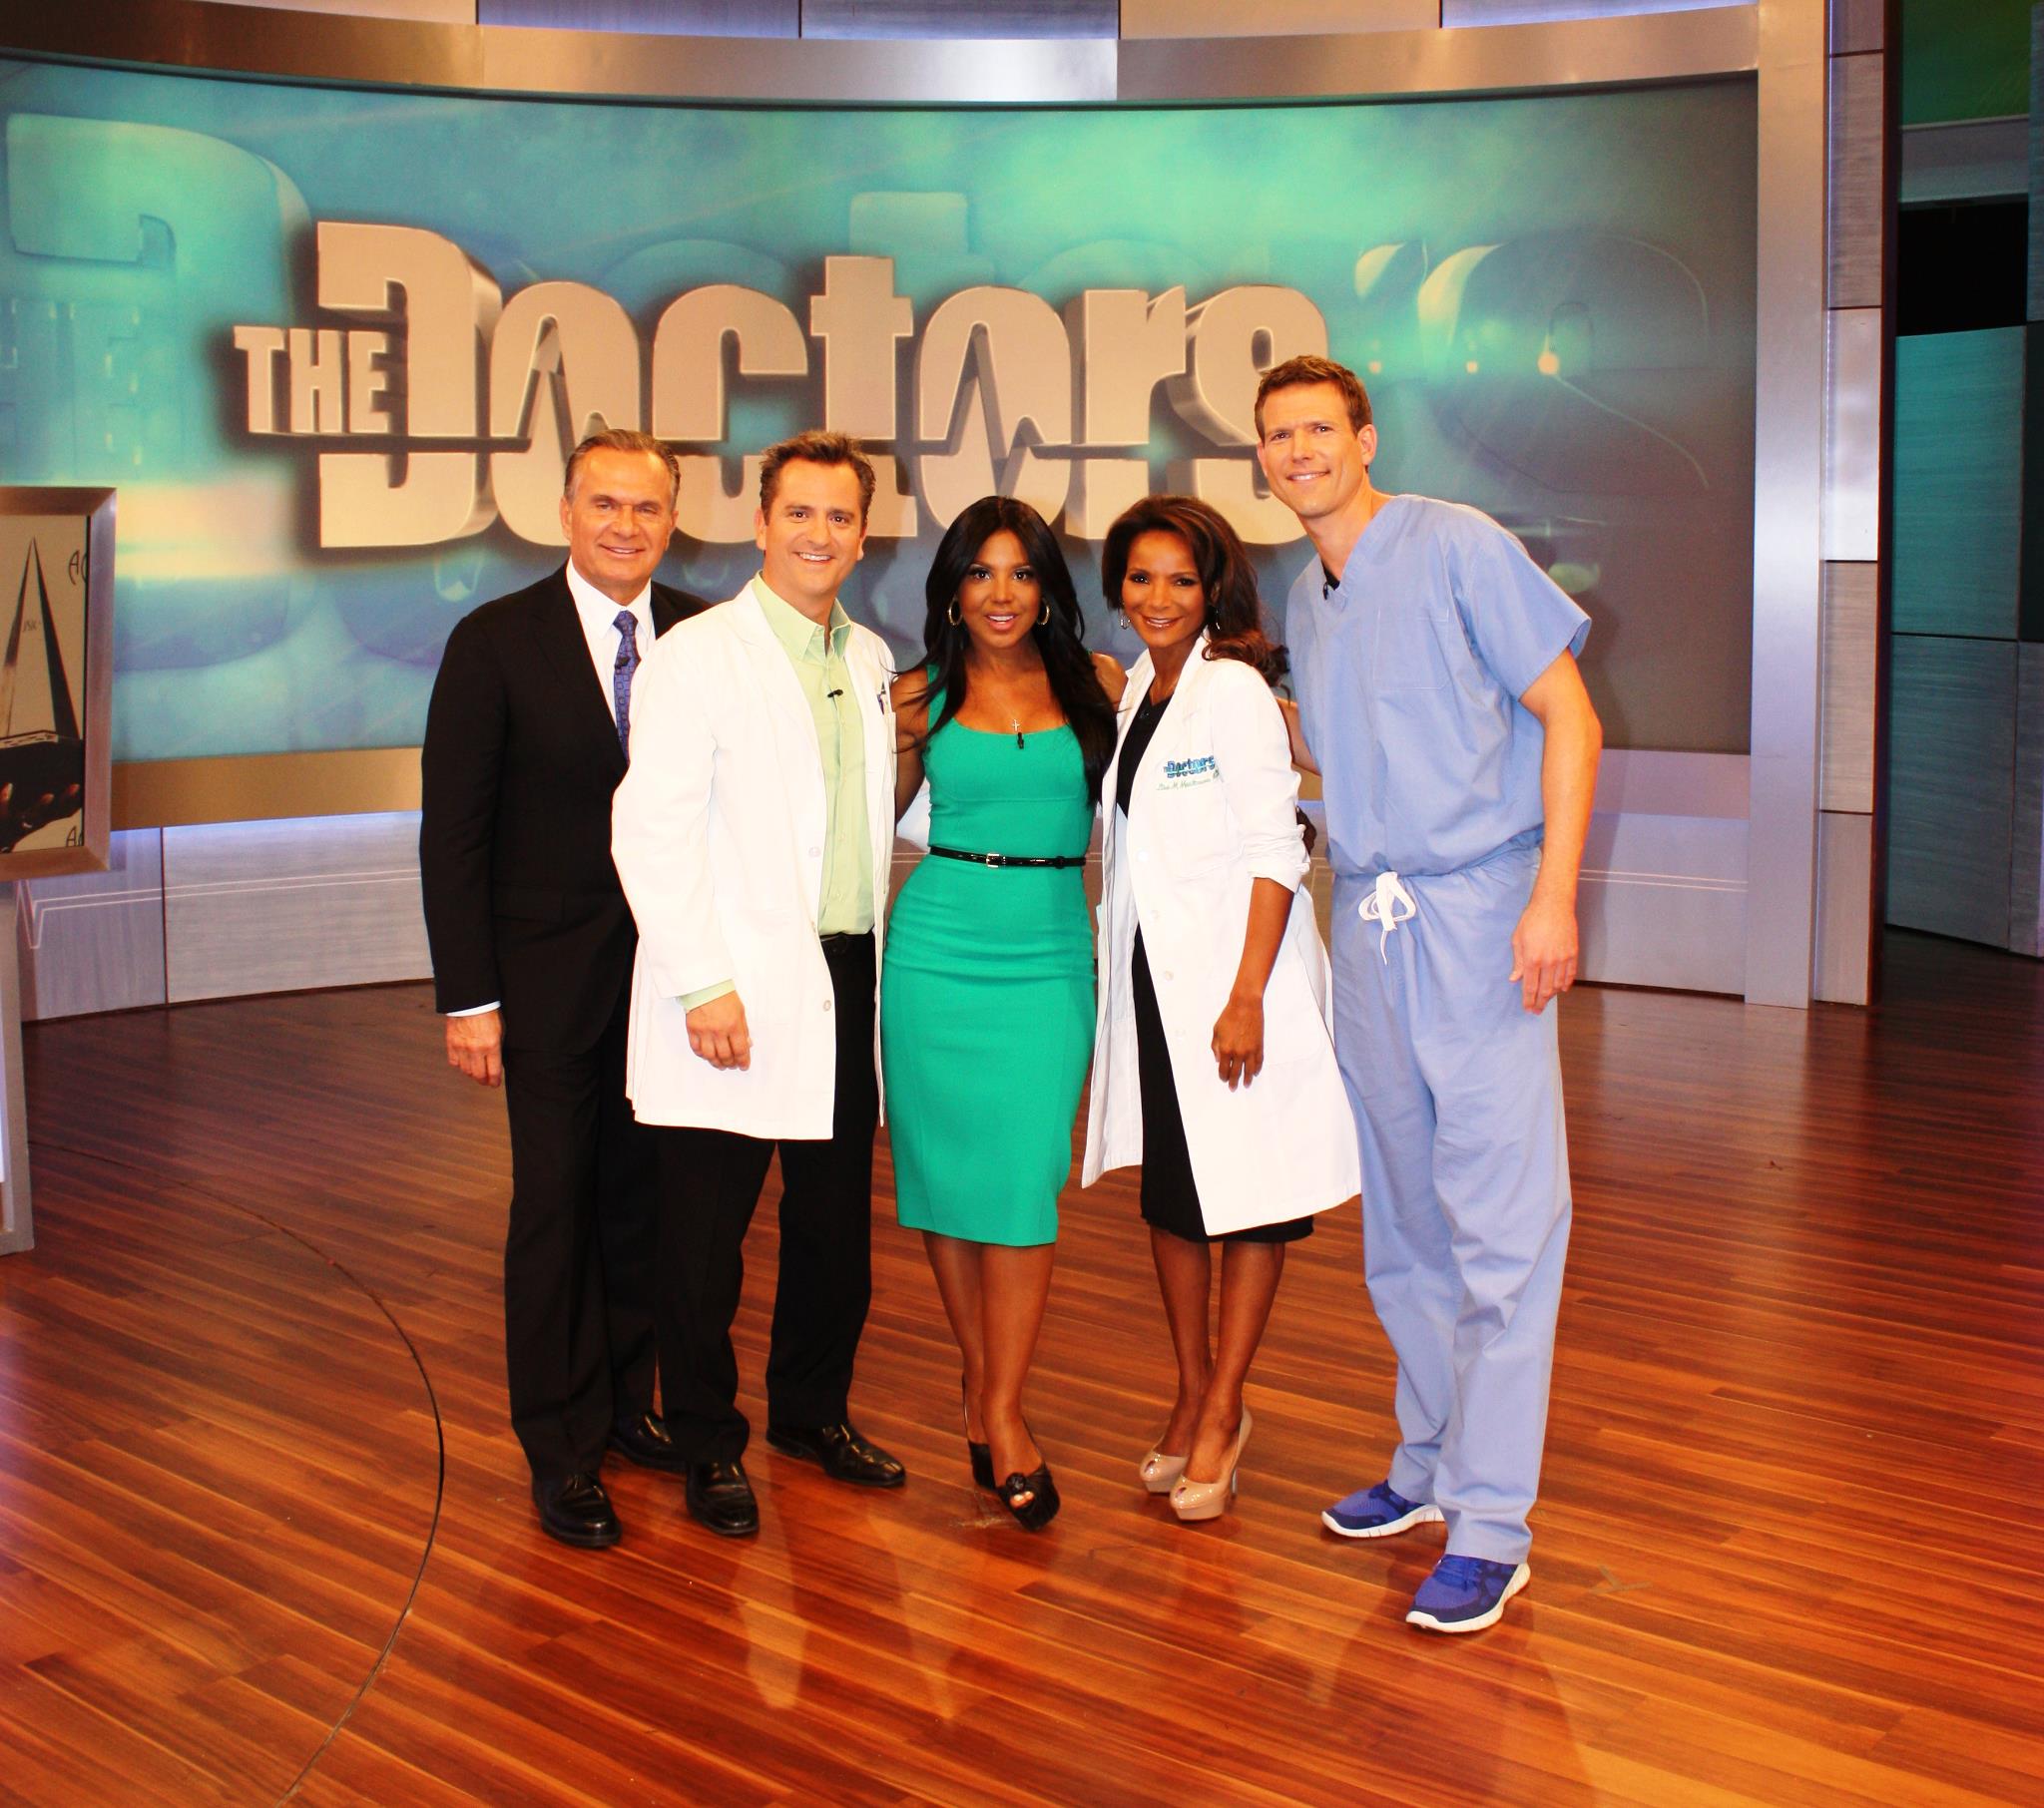 1 of 2 Appearances on The Doctors